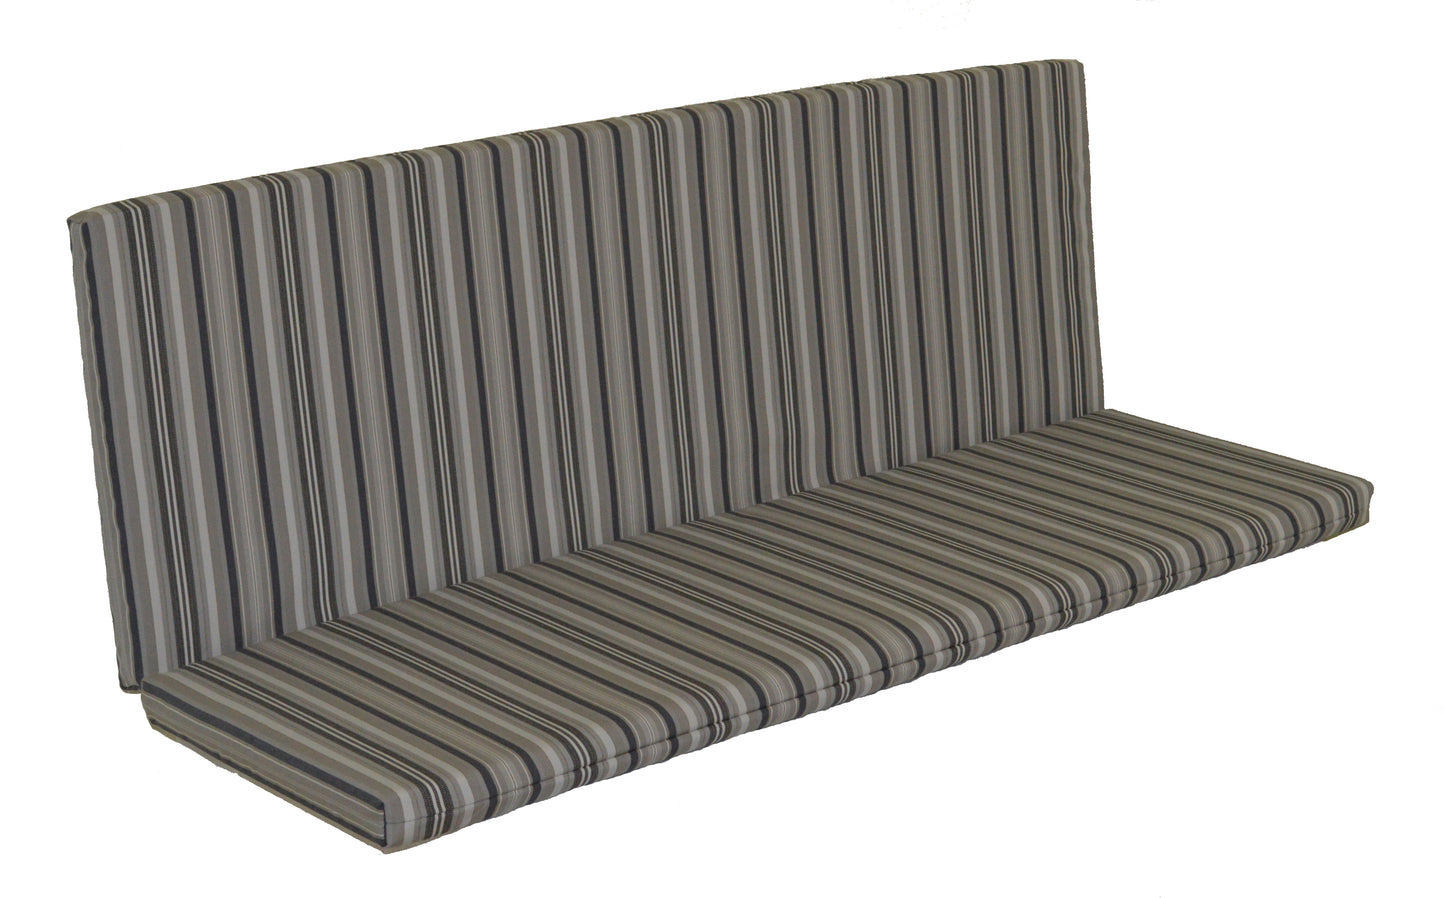 A&L Furniture Co. 5' Full Bench Cushion - LEAD TIME TO SHIP 10 BUSINESS DAYS